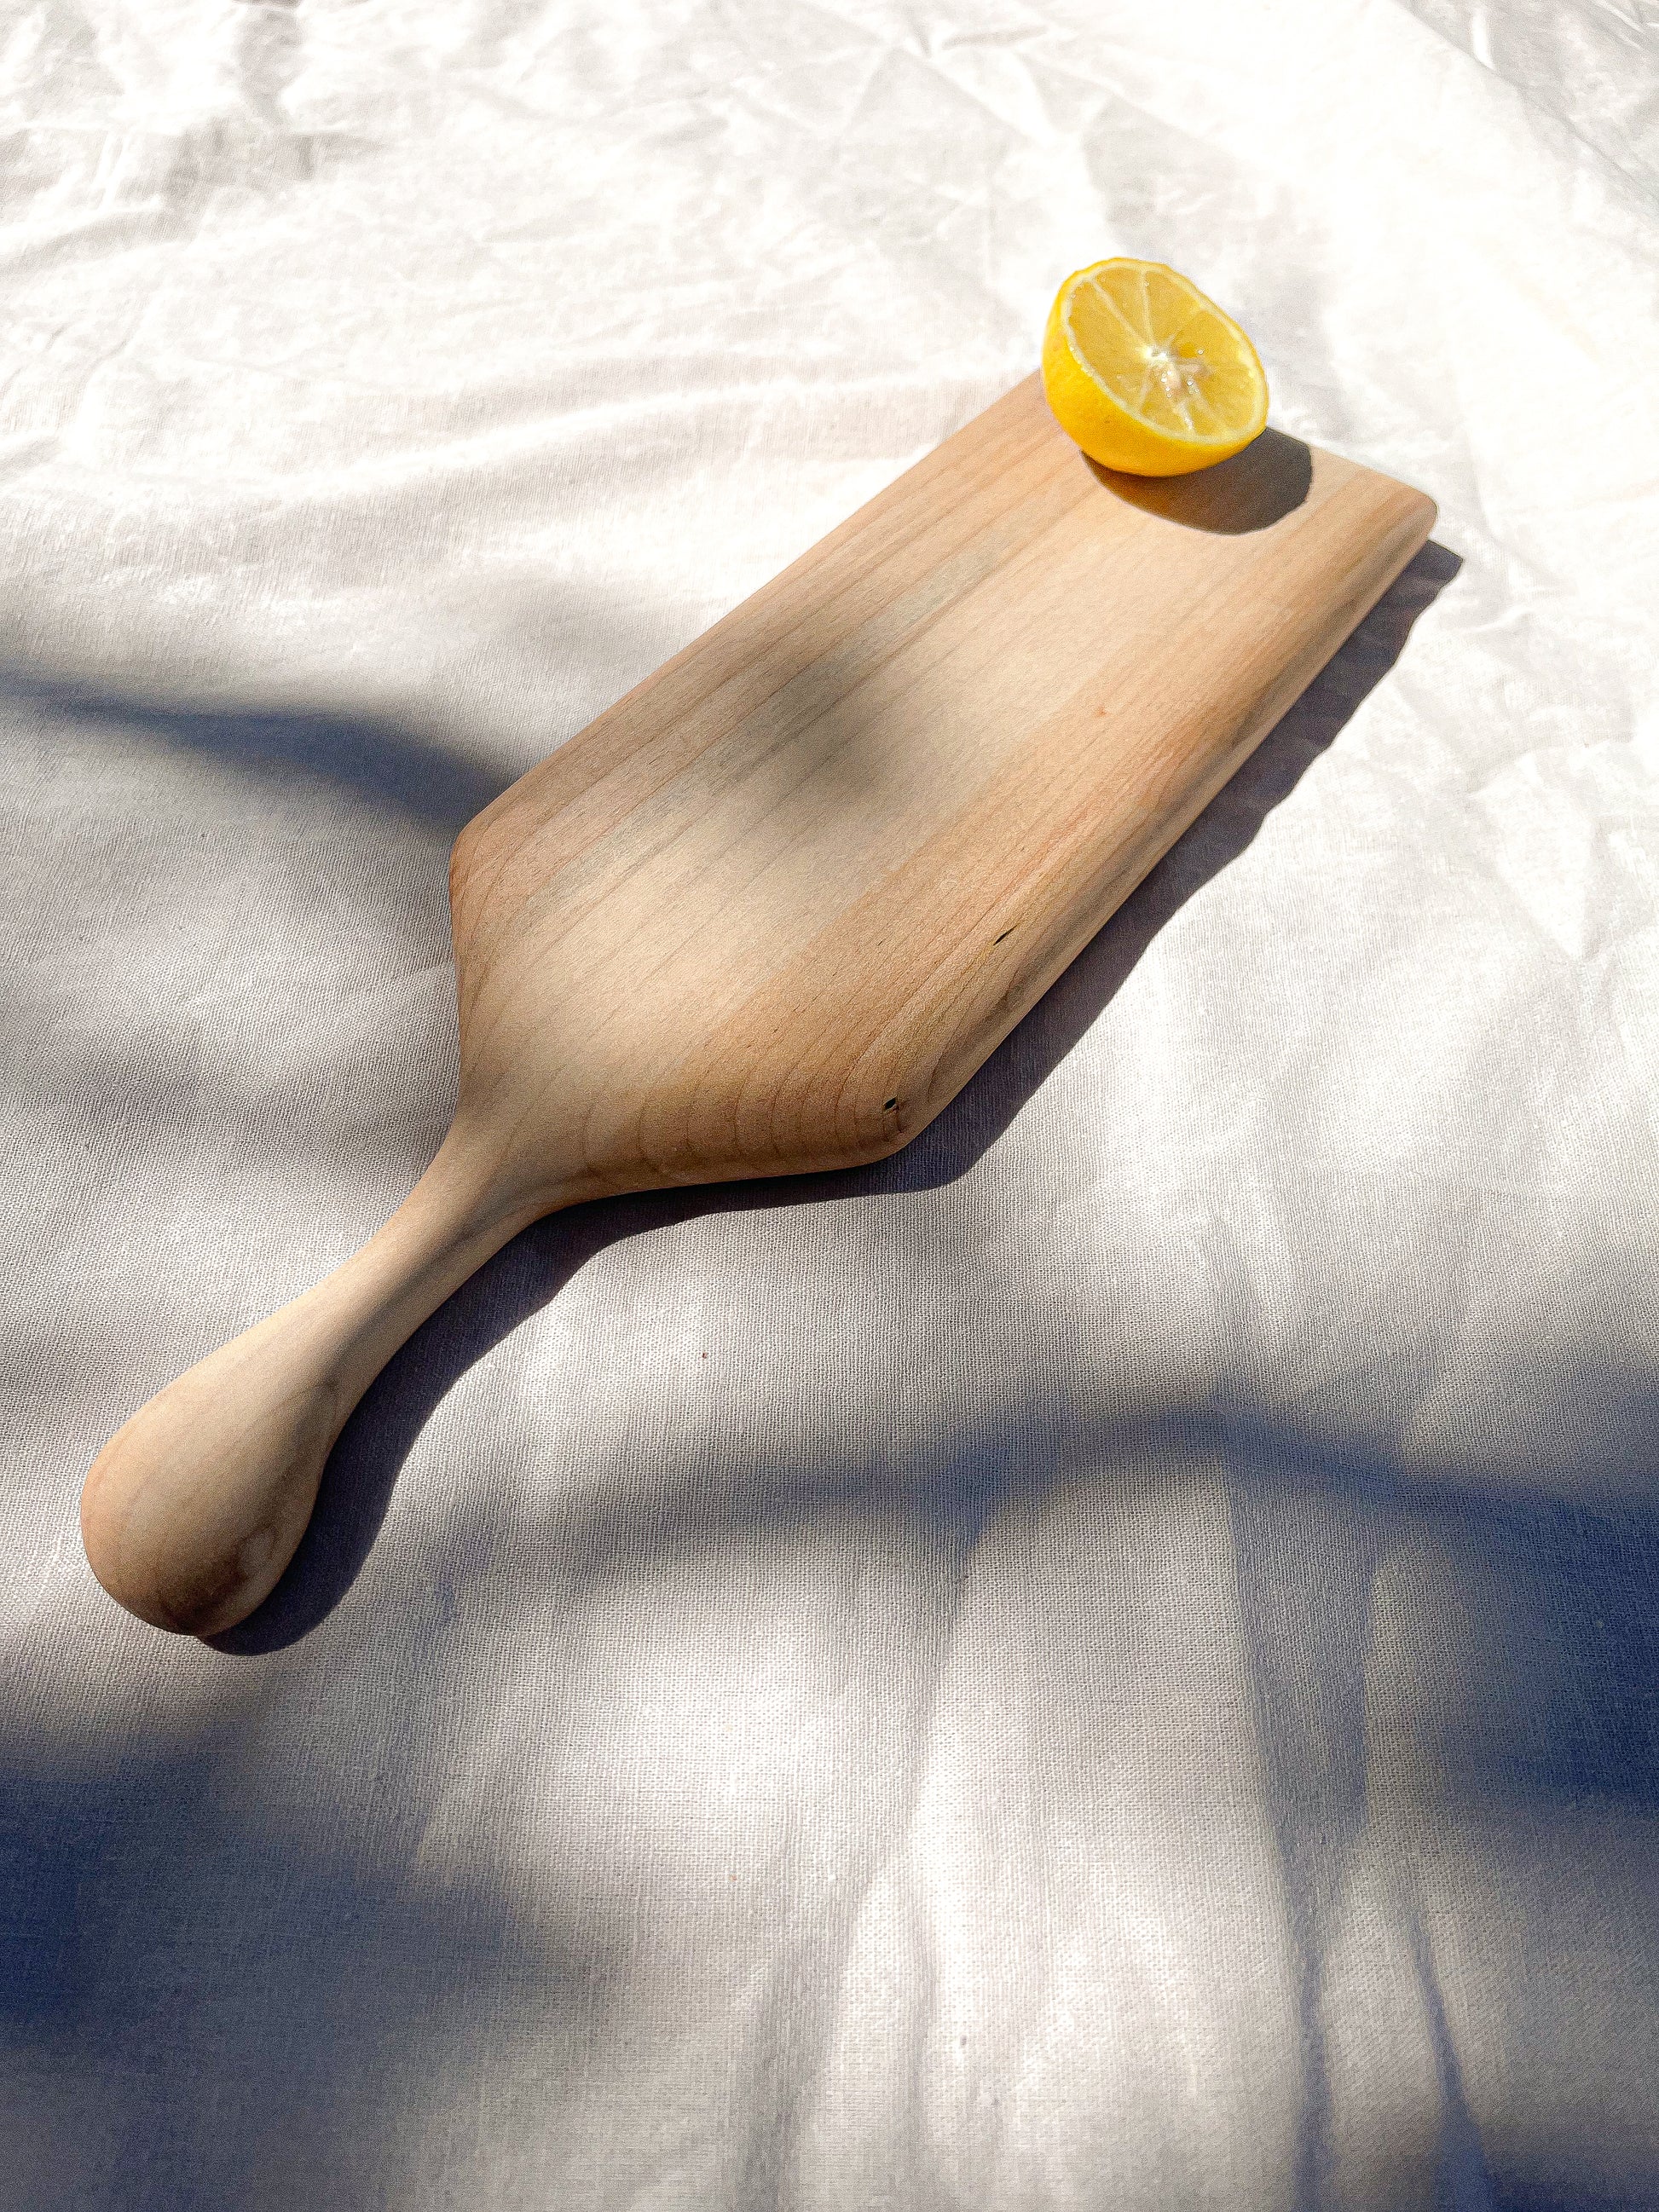 Hand-crafted cheeseboard perfect for a small sampling of cheese or appetizers. The handle is perfect for carrying to the table, and adds visual interest. Made sustainably from maple wood in Gatineau, Canada.